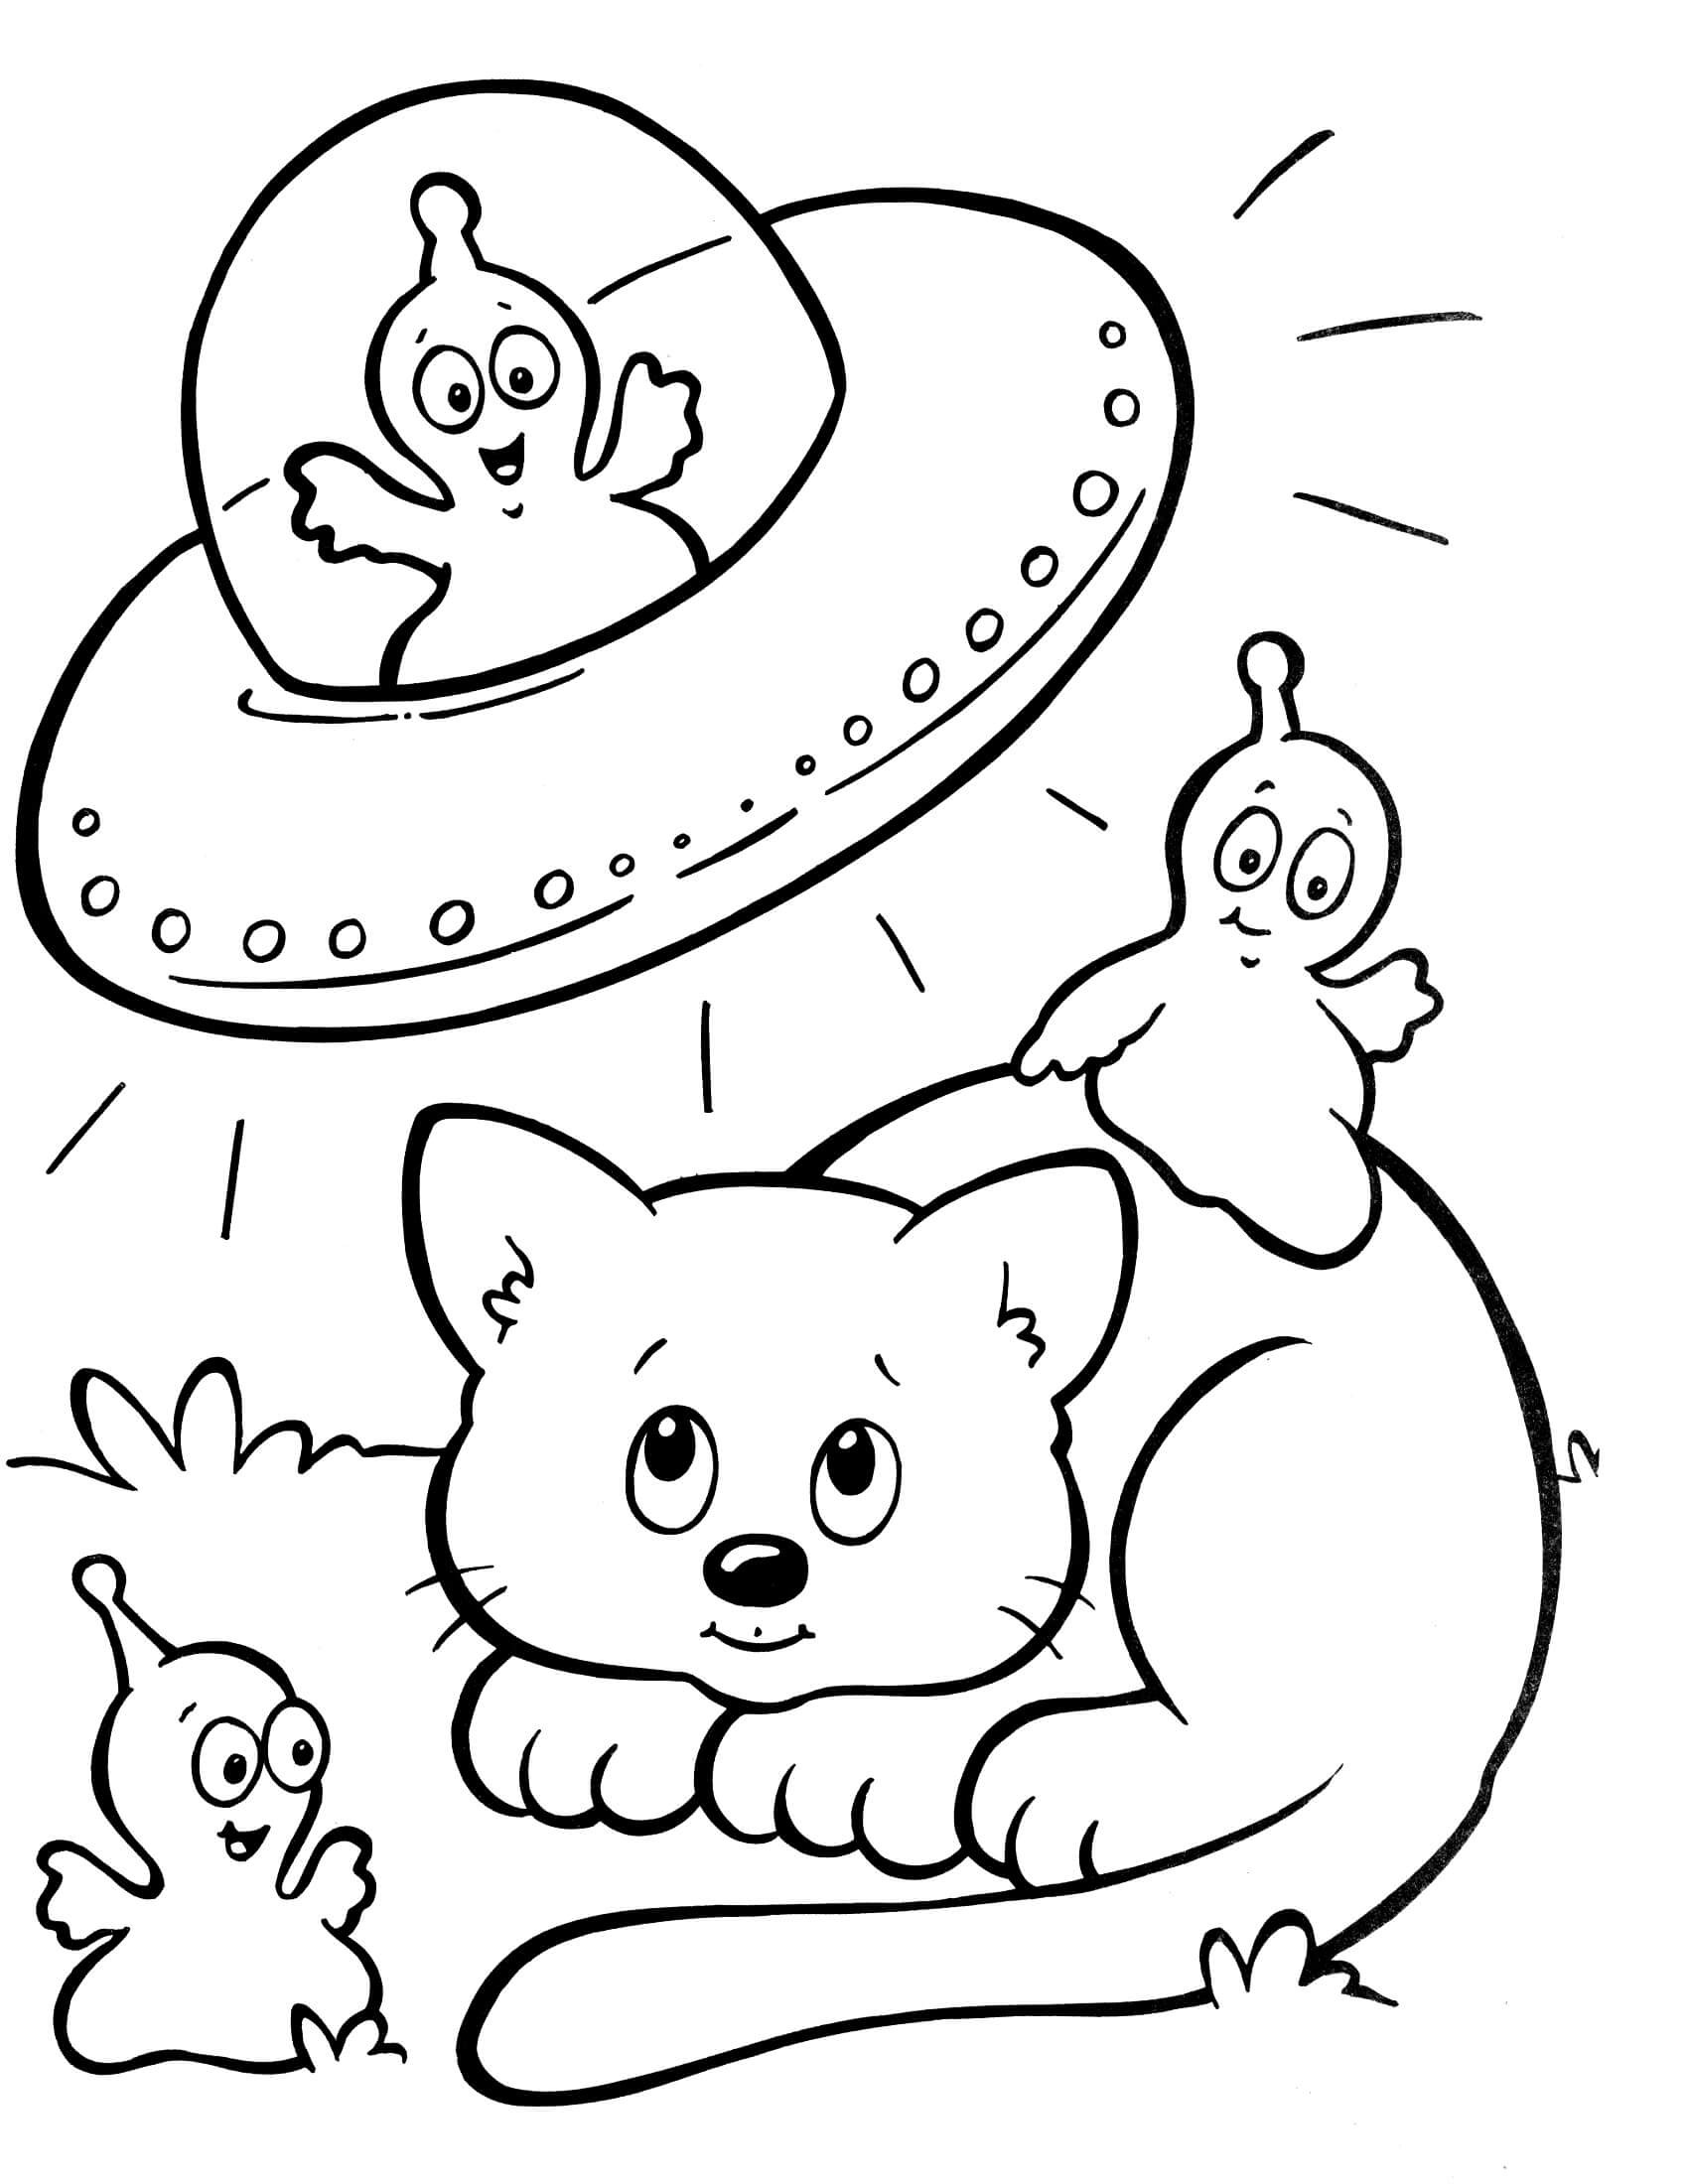 Crayola Coloring Pages For Girls
 Crayola 14 – Coloringcolor